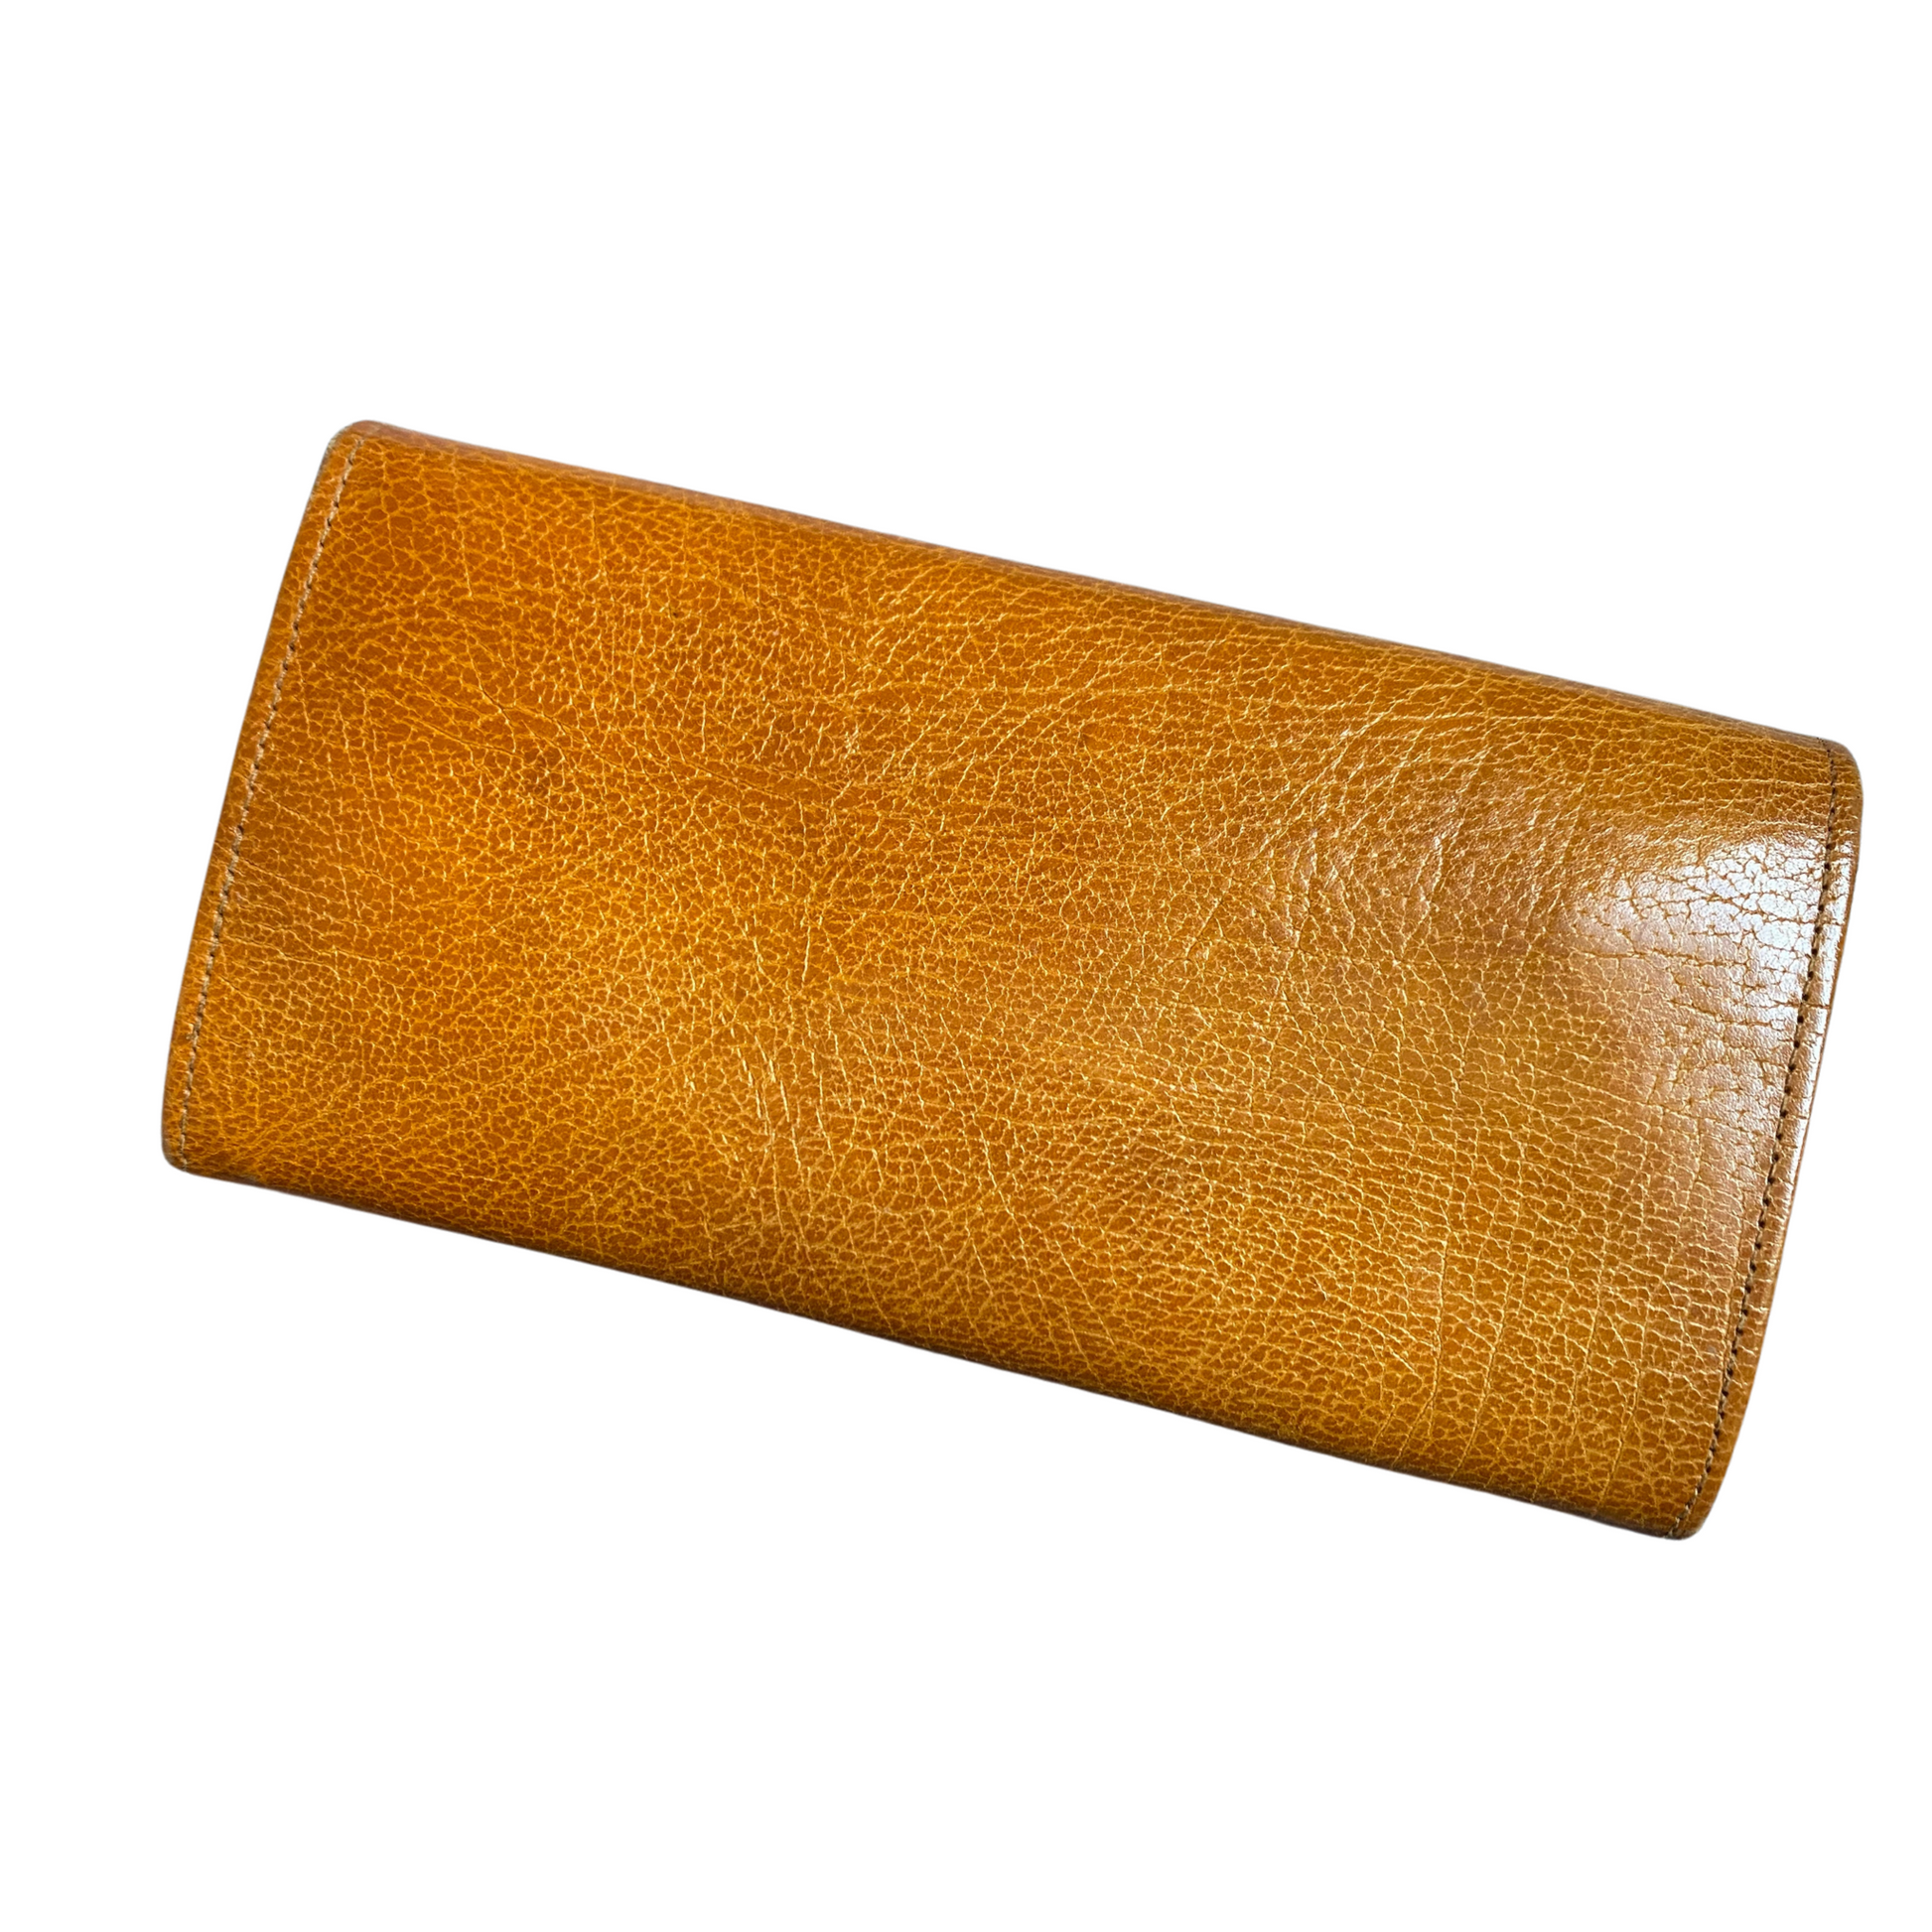 Textured light brown leather wallet fold over wallet with hidden coin purse  Rear view